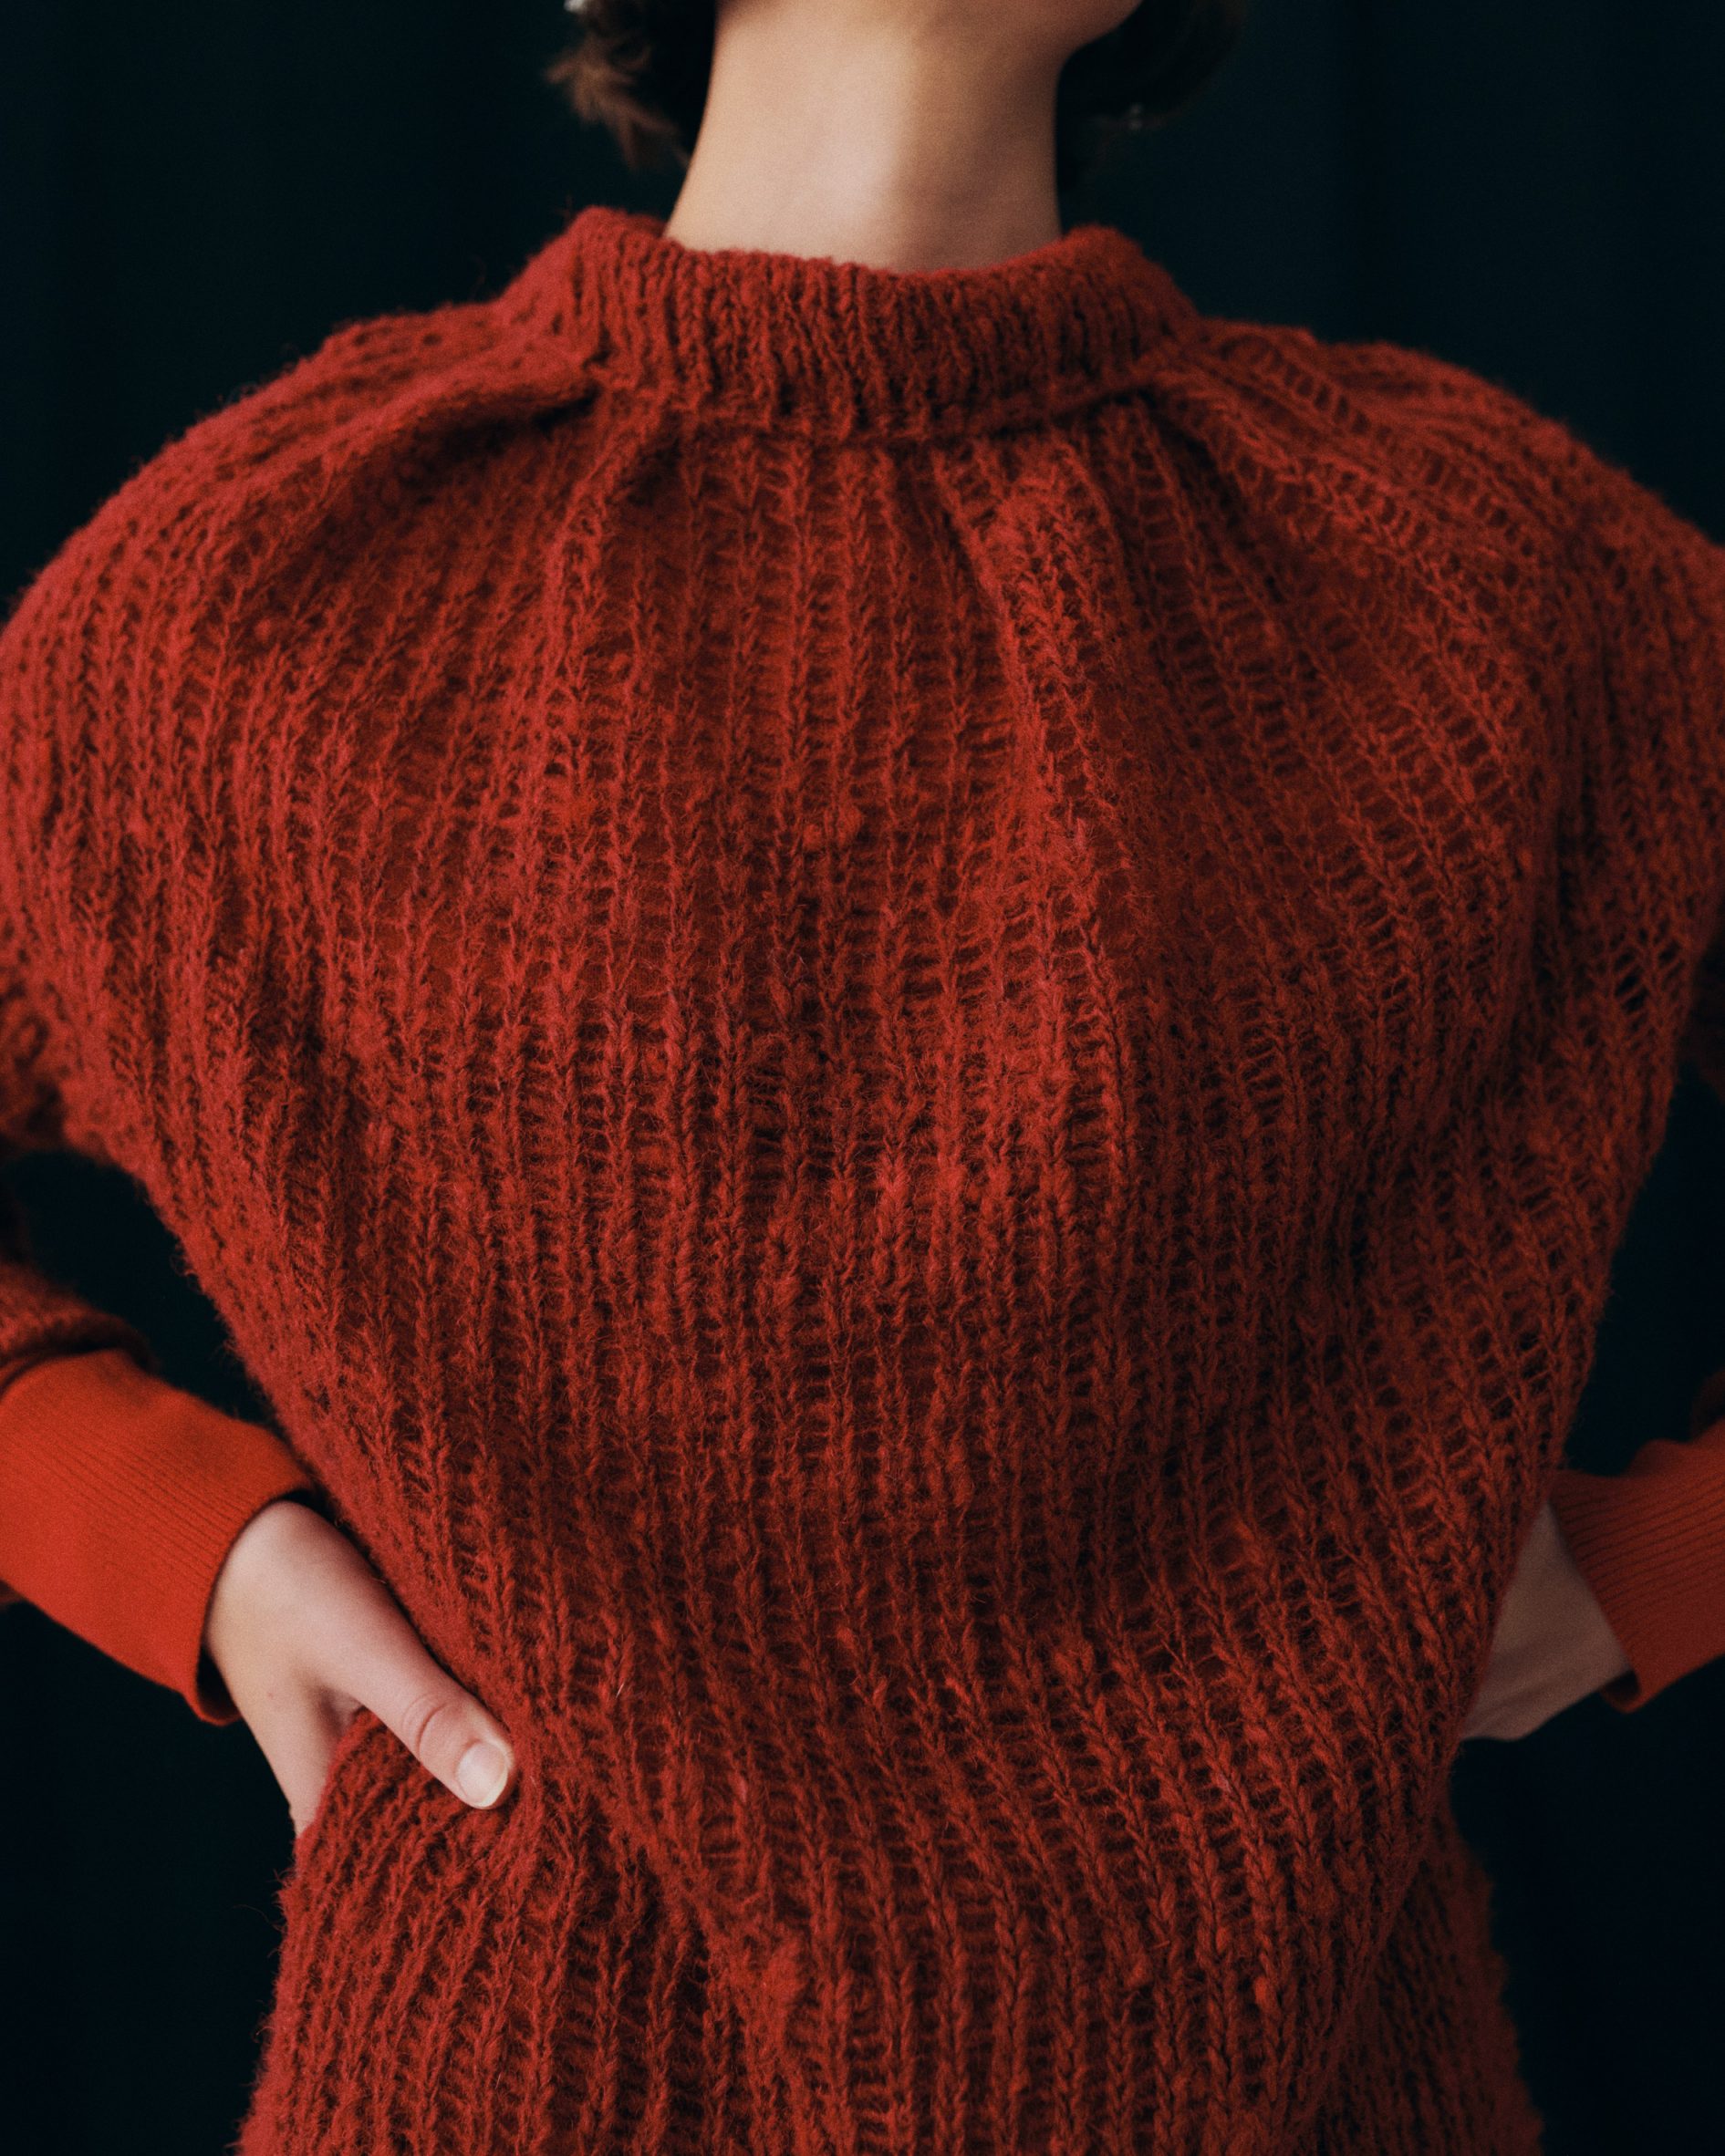 Photo of a woman's torso wearing a deep red knit sweater